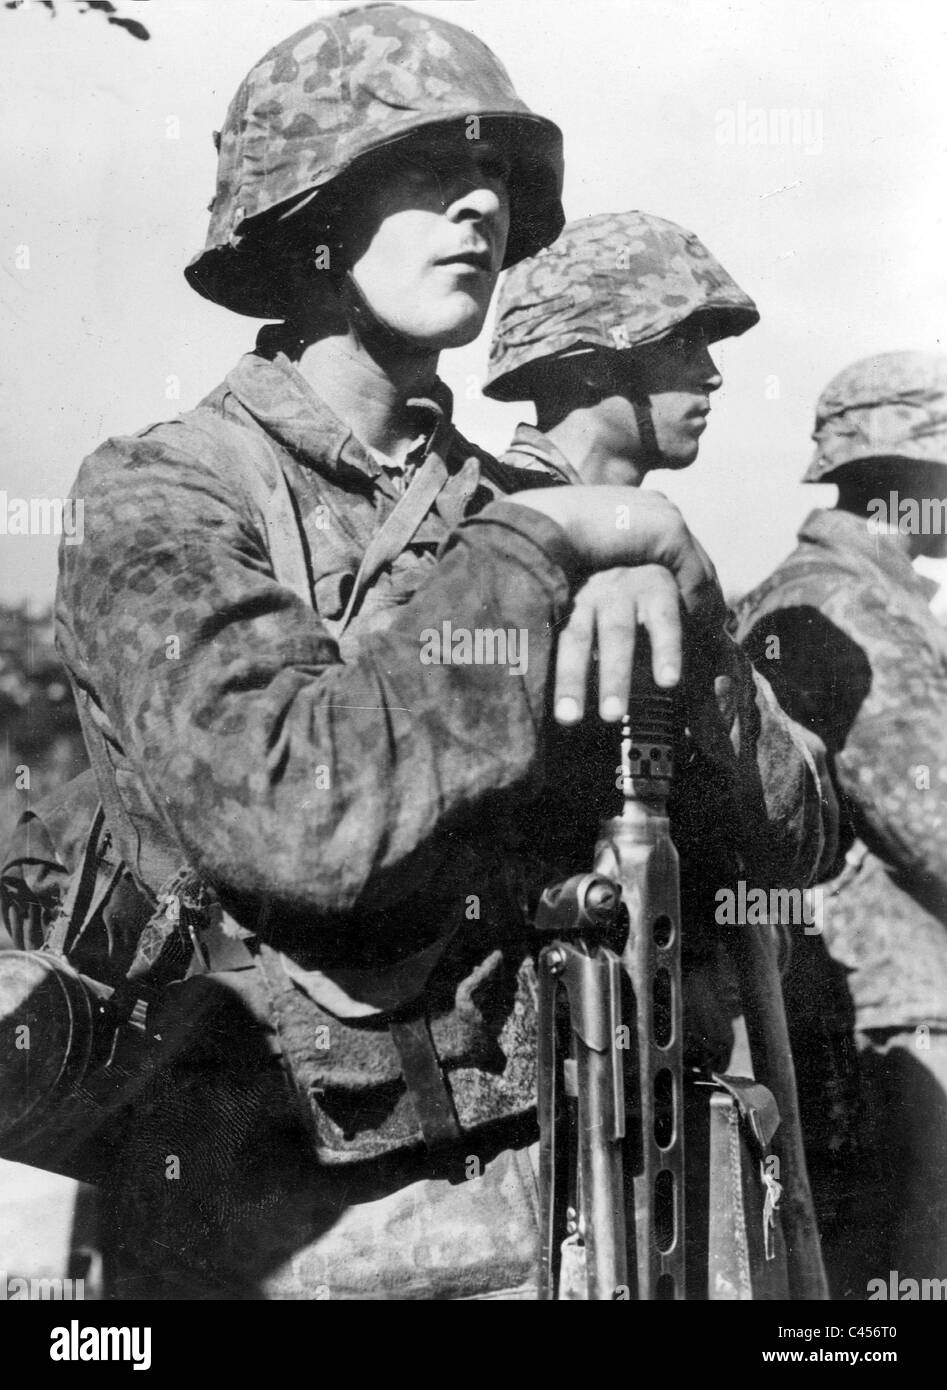 Soldiers of the 12th SS-Panzer Division 'Hitler Youth', 1944 Stock Photo